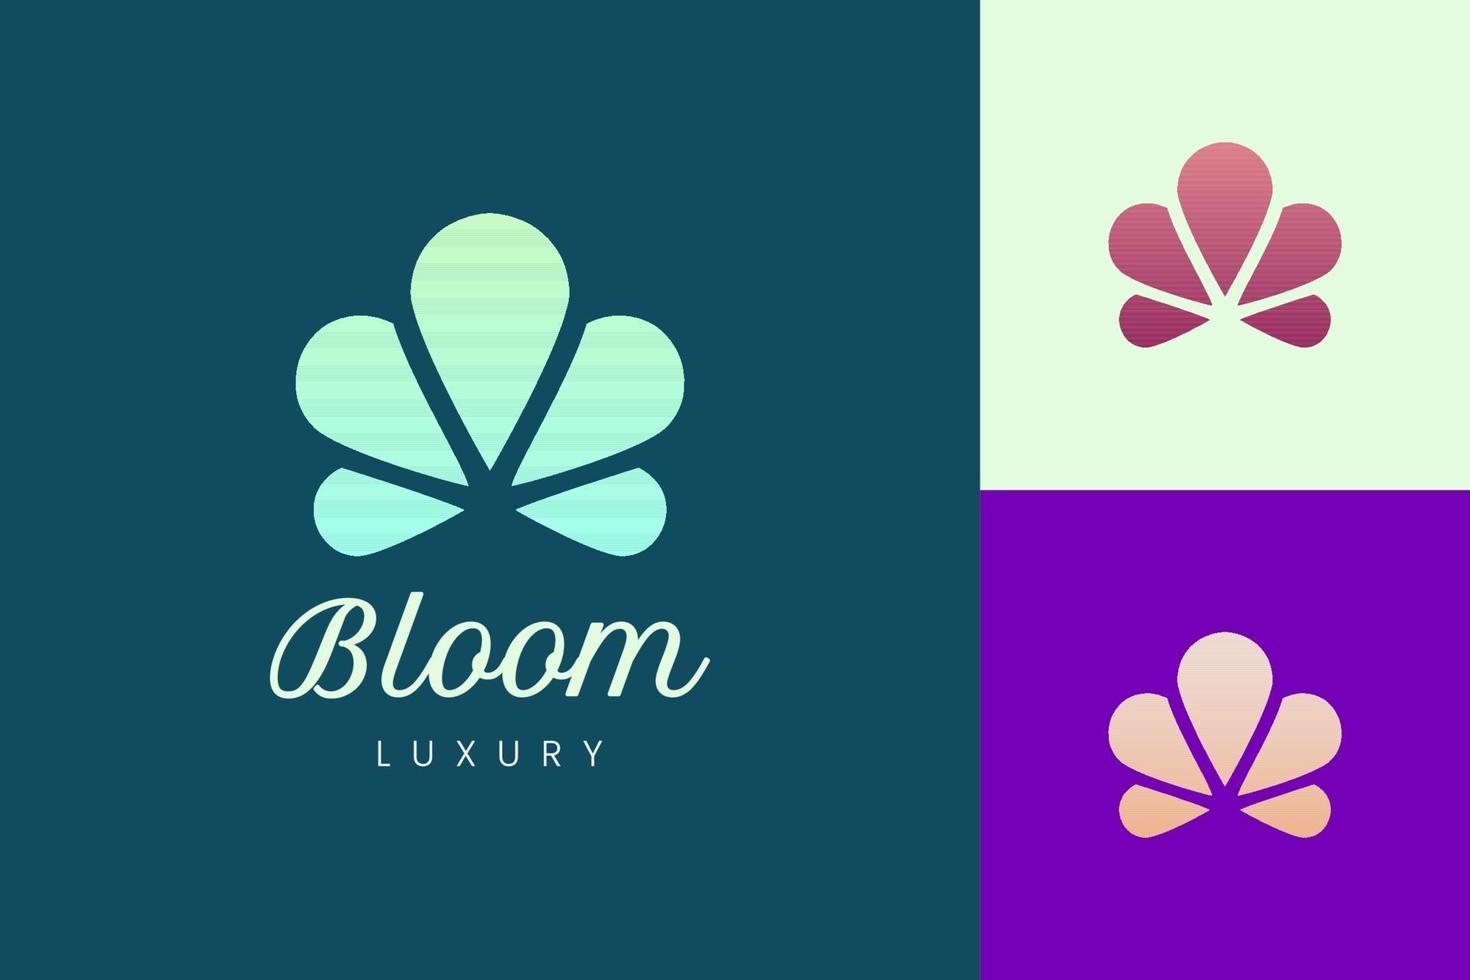 Flower logo in round and clean shape with soft color vector